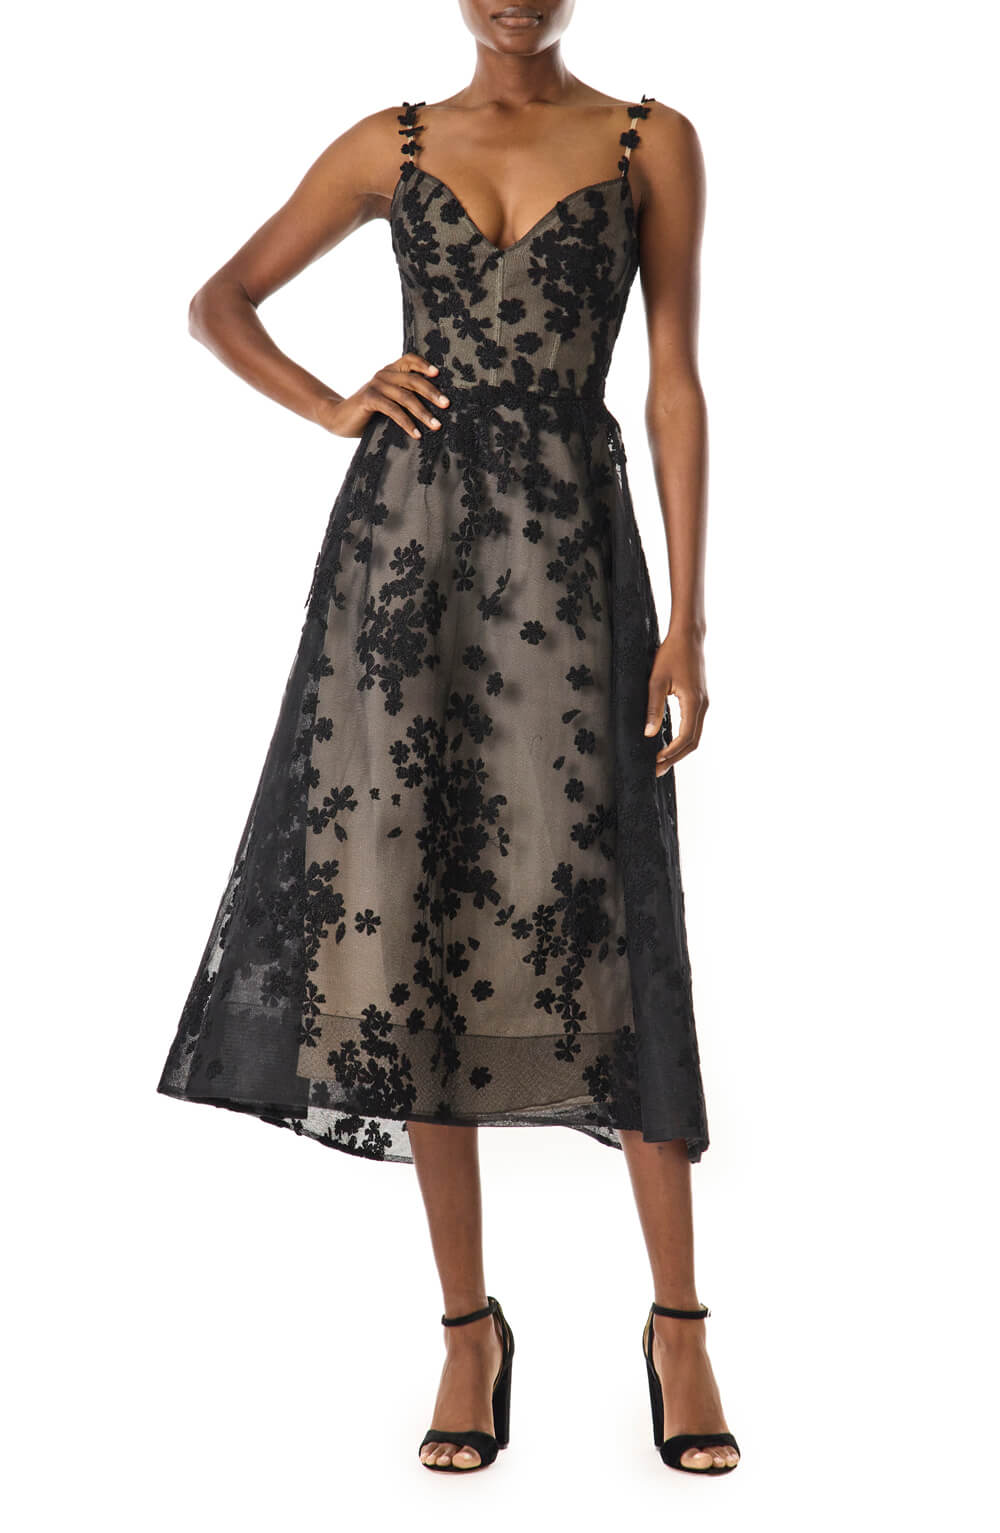 Monique Lhuillier black lace and embroidered tulle aline cocktail dress with spaghetti straps.